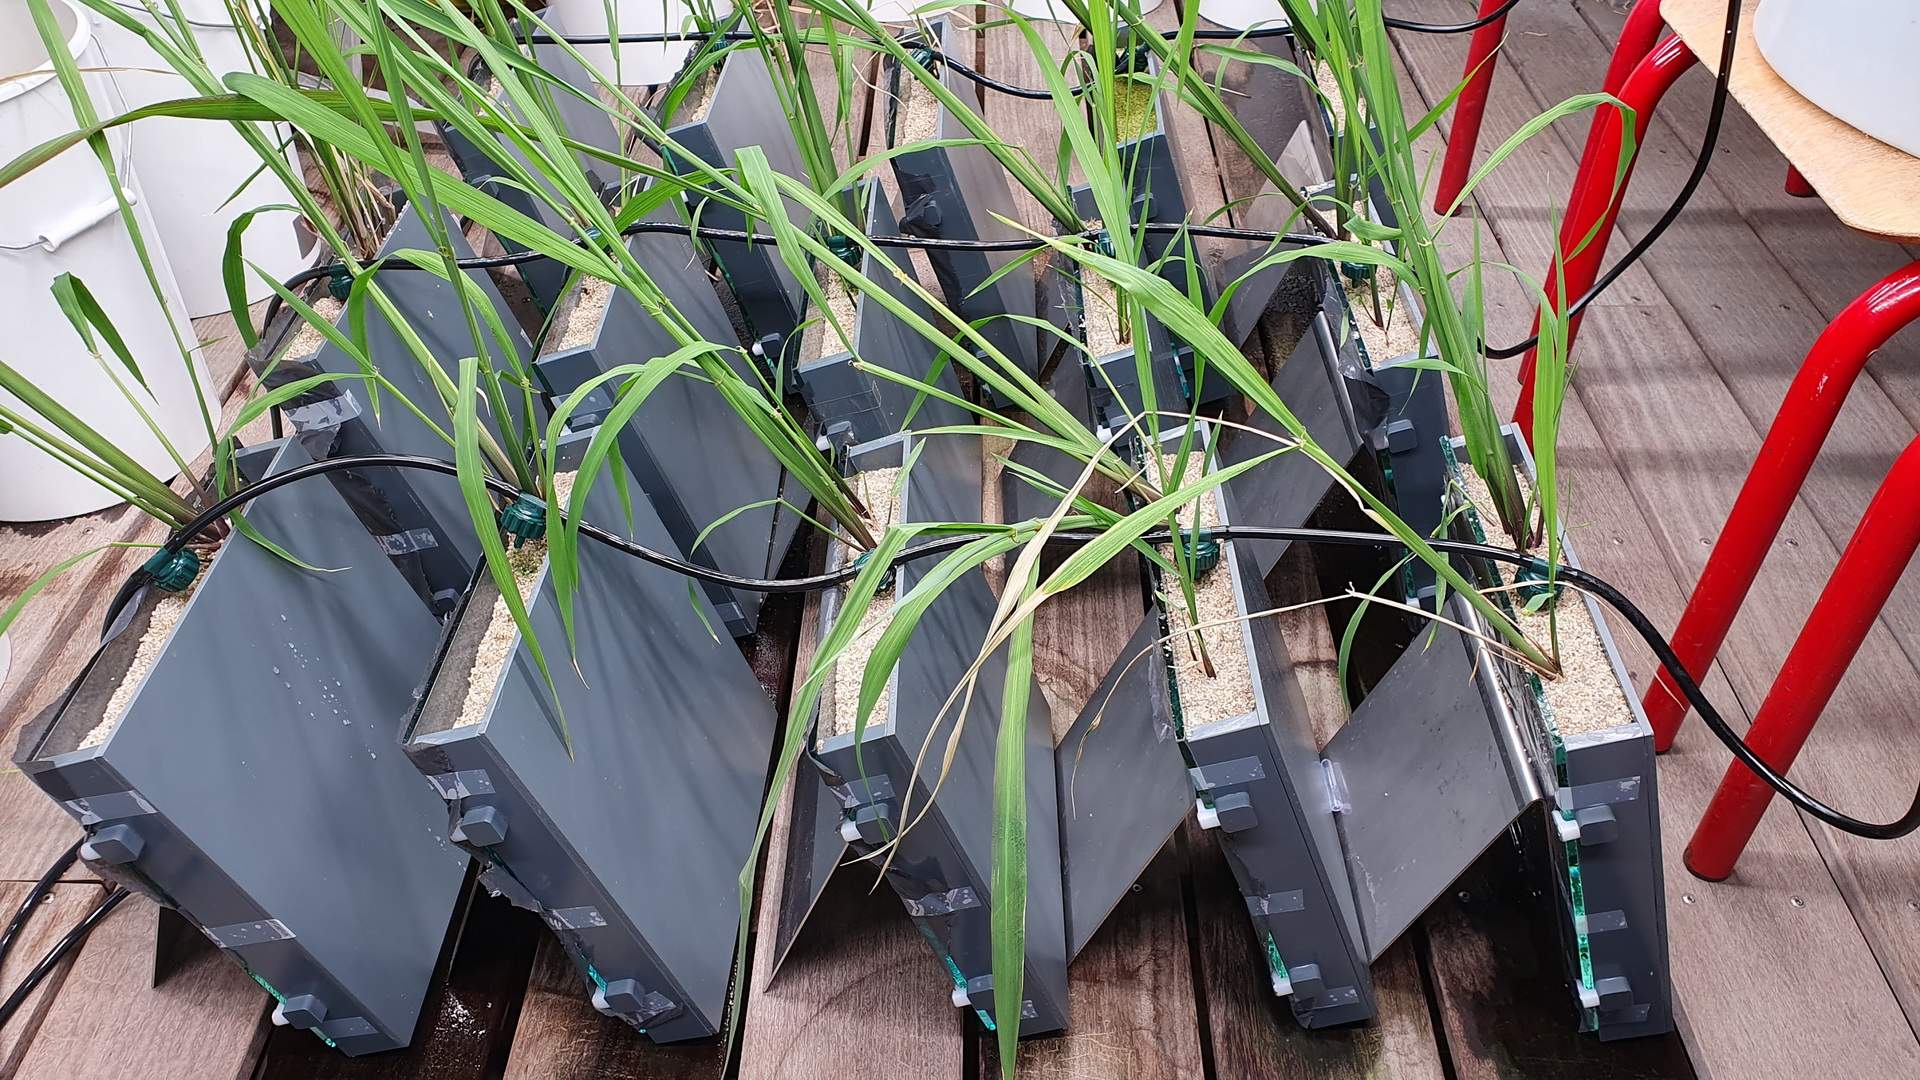 Our new custom-made rhizoboxes enable studies of roots in sand or soil culture